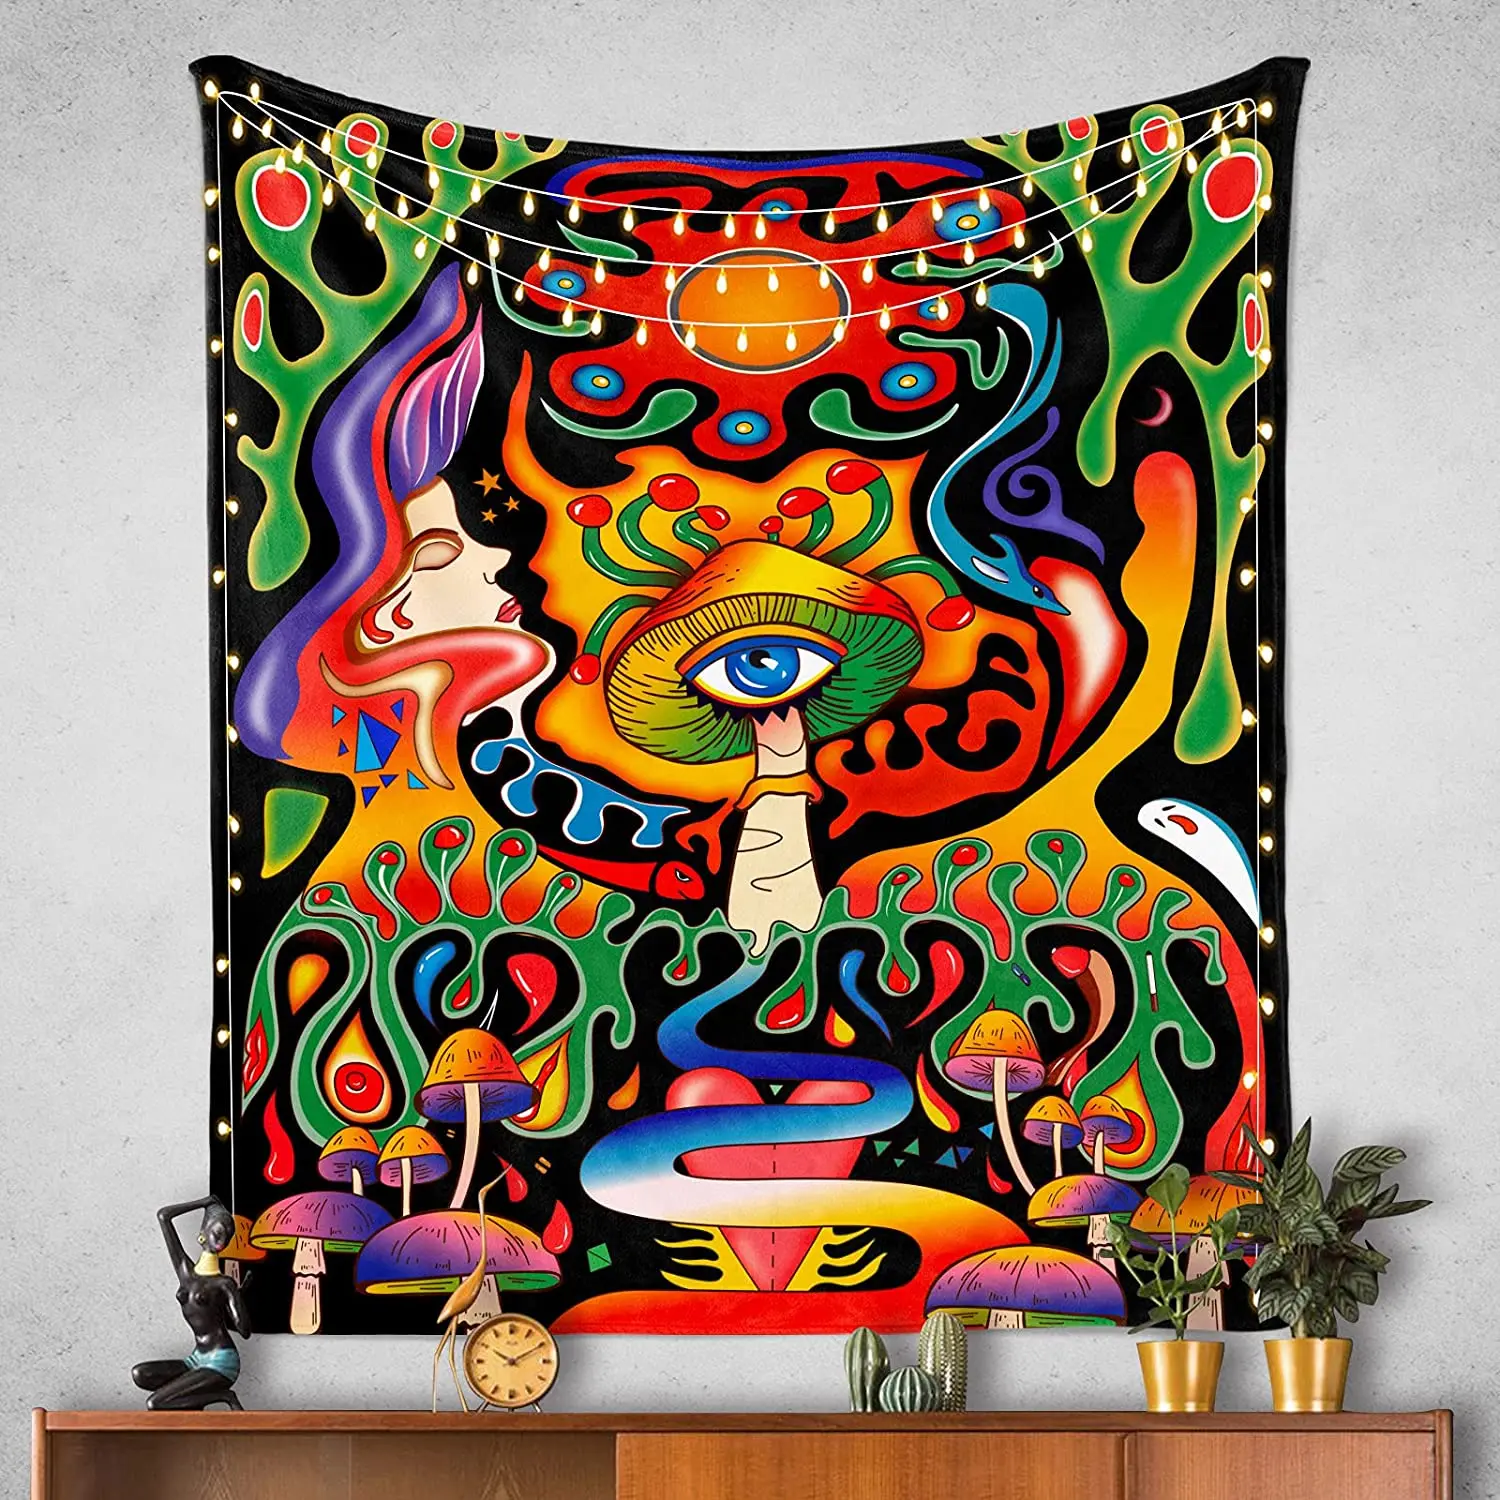 

Psychedelic Mushroom Tapestry Wall Hanging colorful Trippy Vertical Hippy Eye tapestries for Bedroom Living Room Dorm Wall Decor